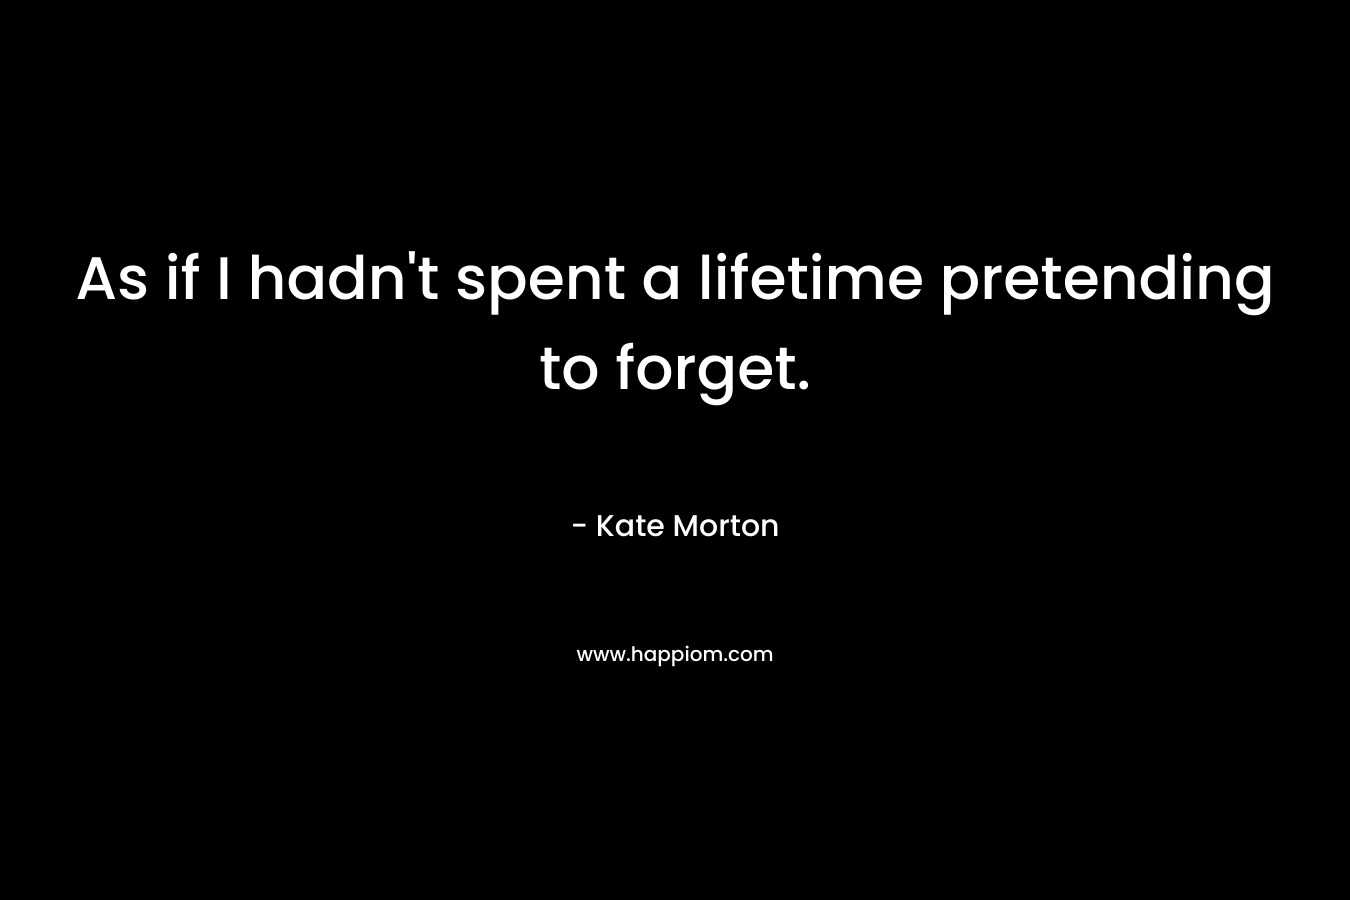 As if I hadn't spent a lifetime pretending to forget.